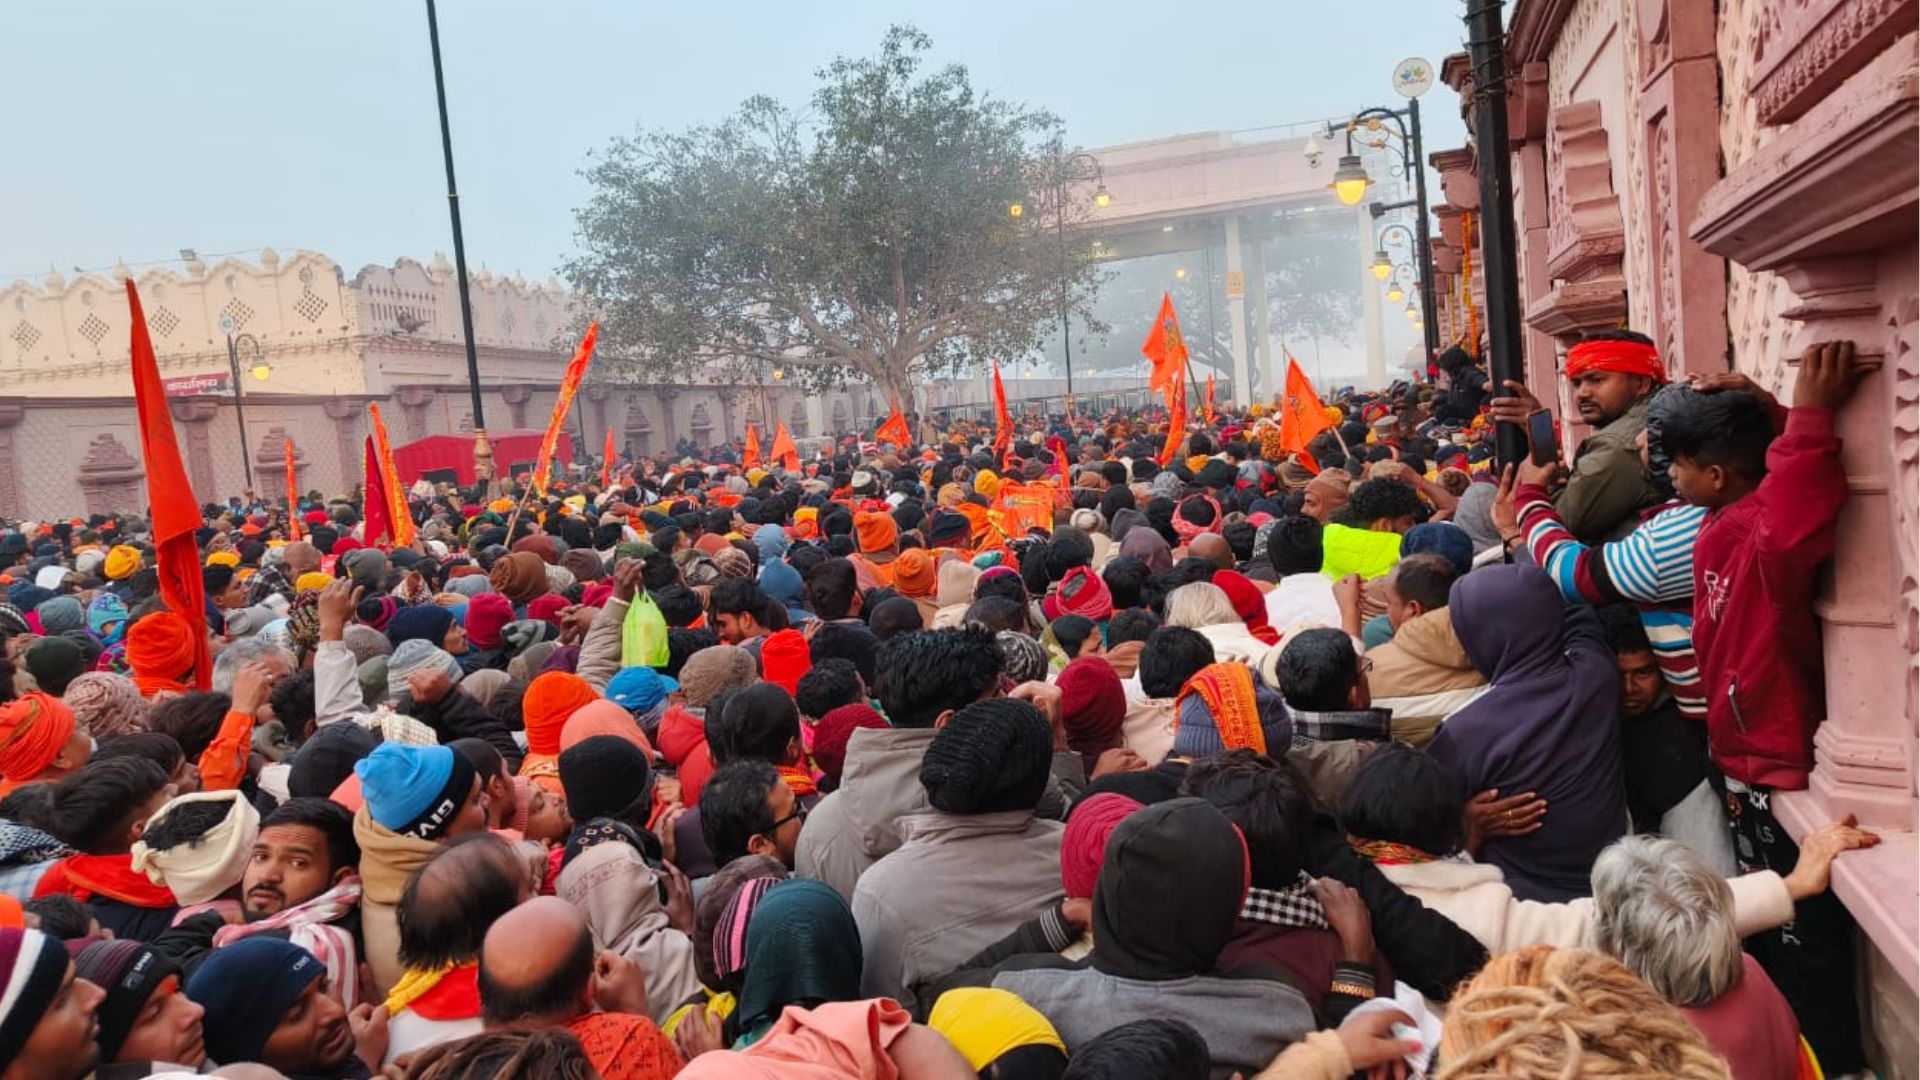 Devotees congregate at Ayodhya’s Ram Temple for ‘darshan’, day after ‘Pran Pratishtha’ ceremony